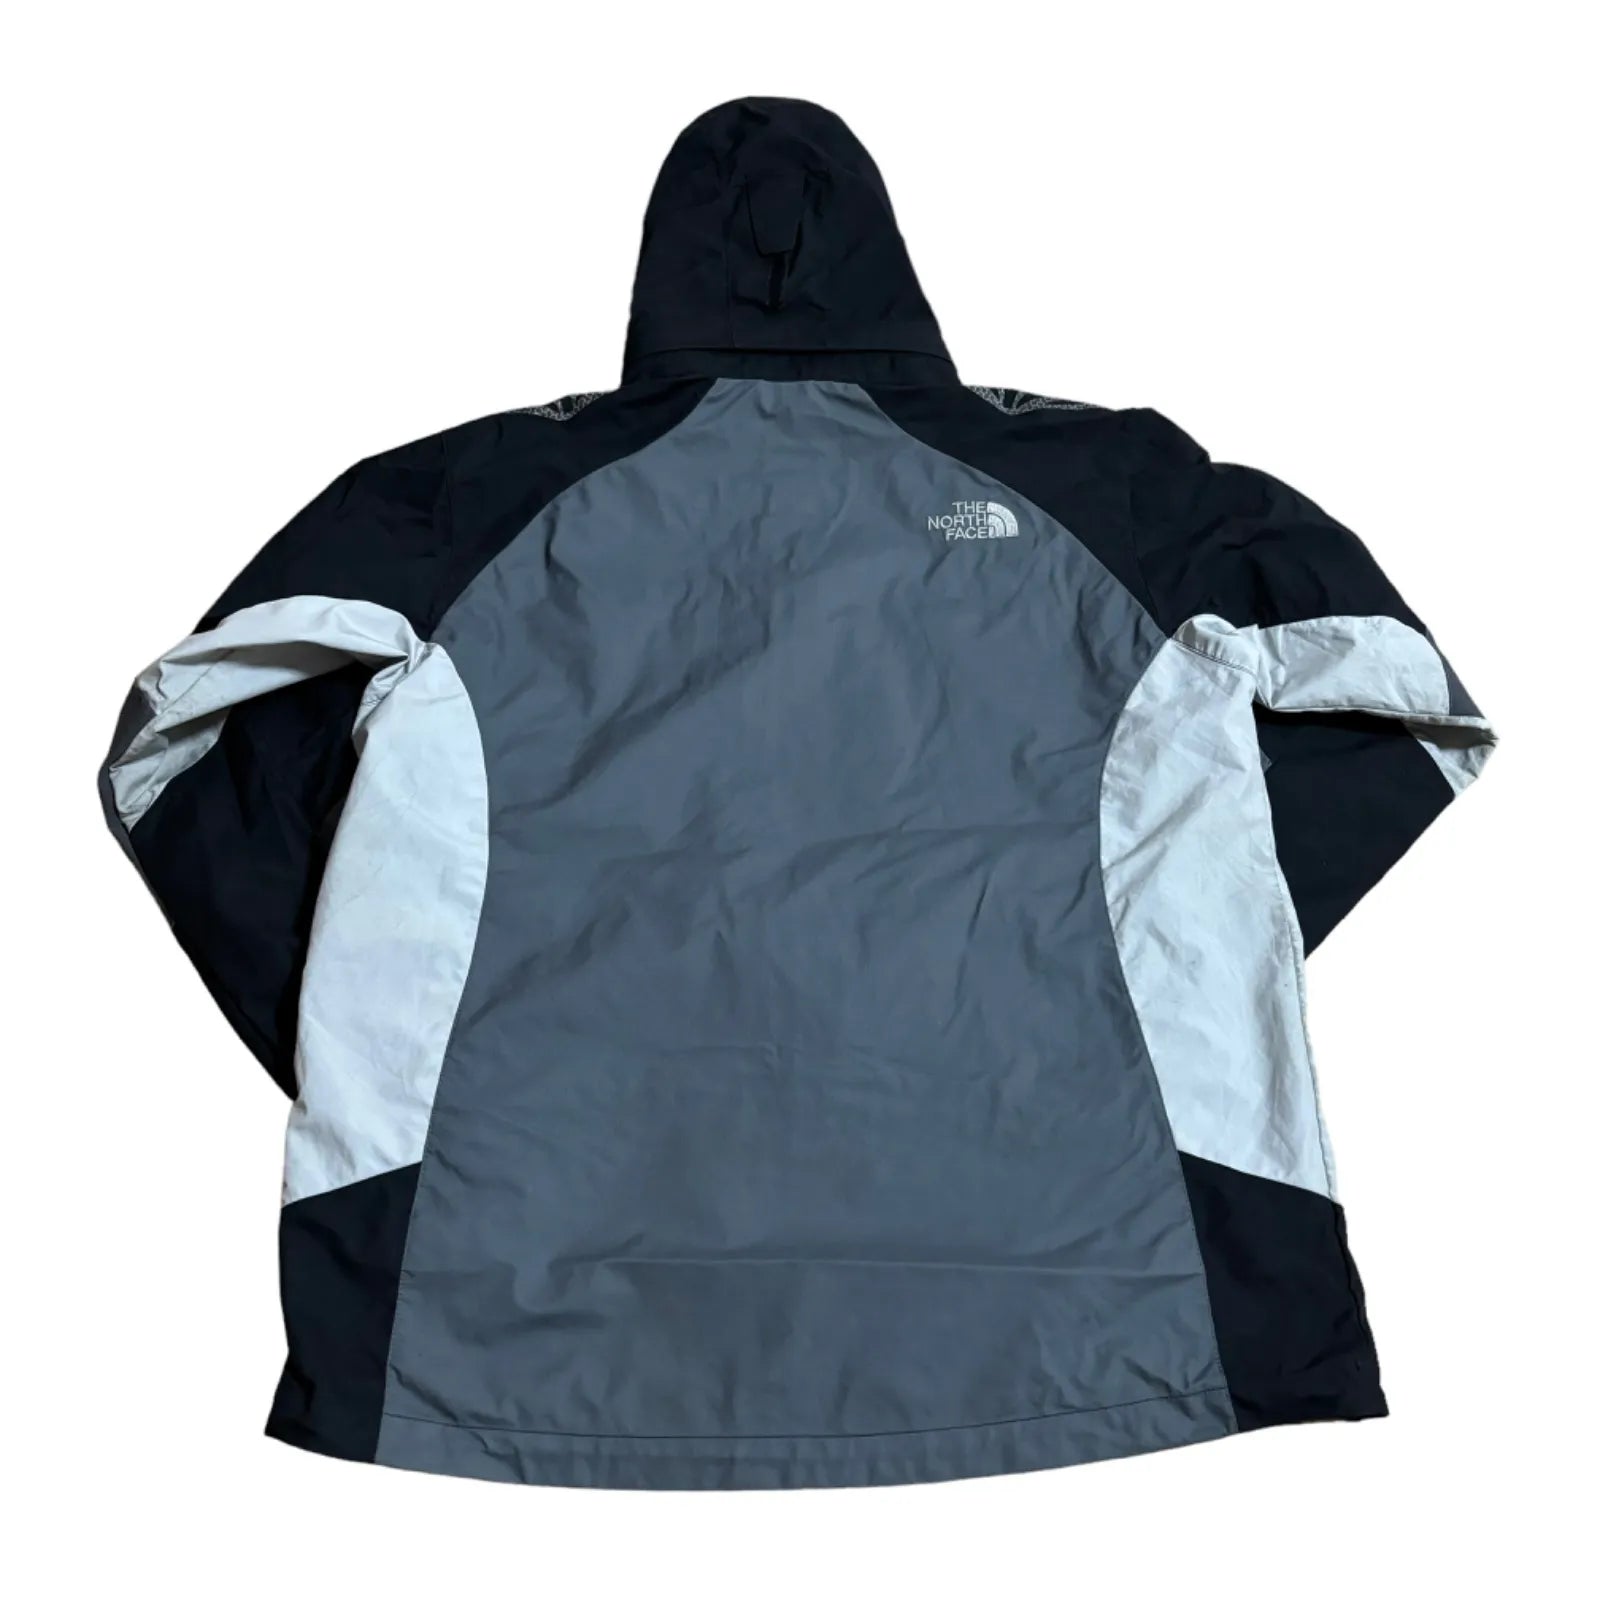 The North Face Nylon Jacket SUMMIT SERIES WIND STOPPER.